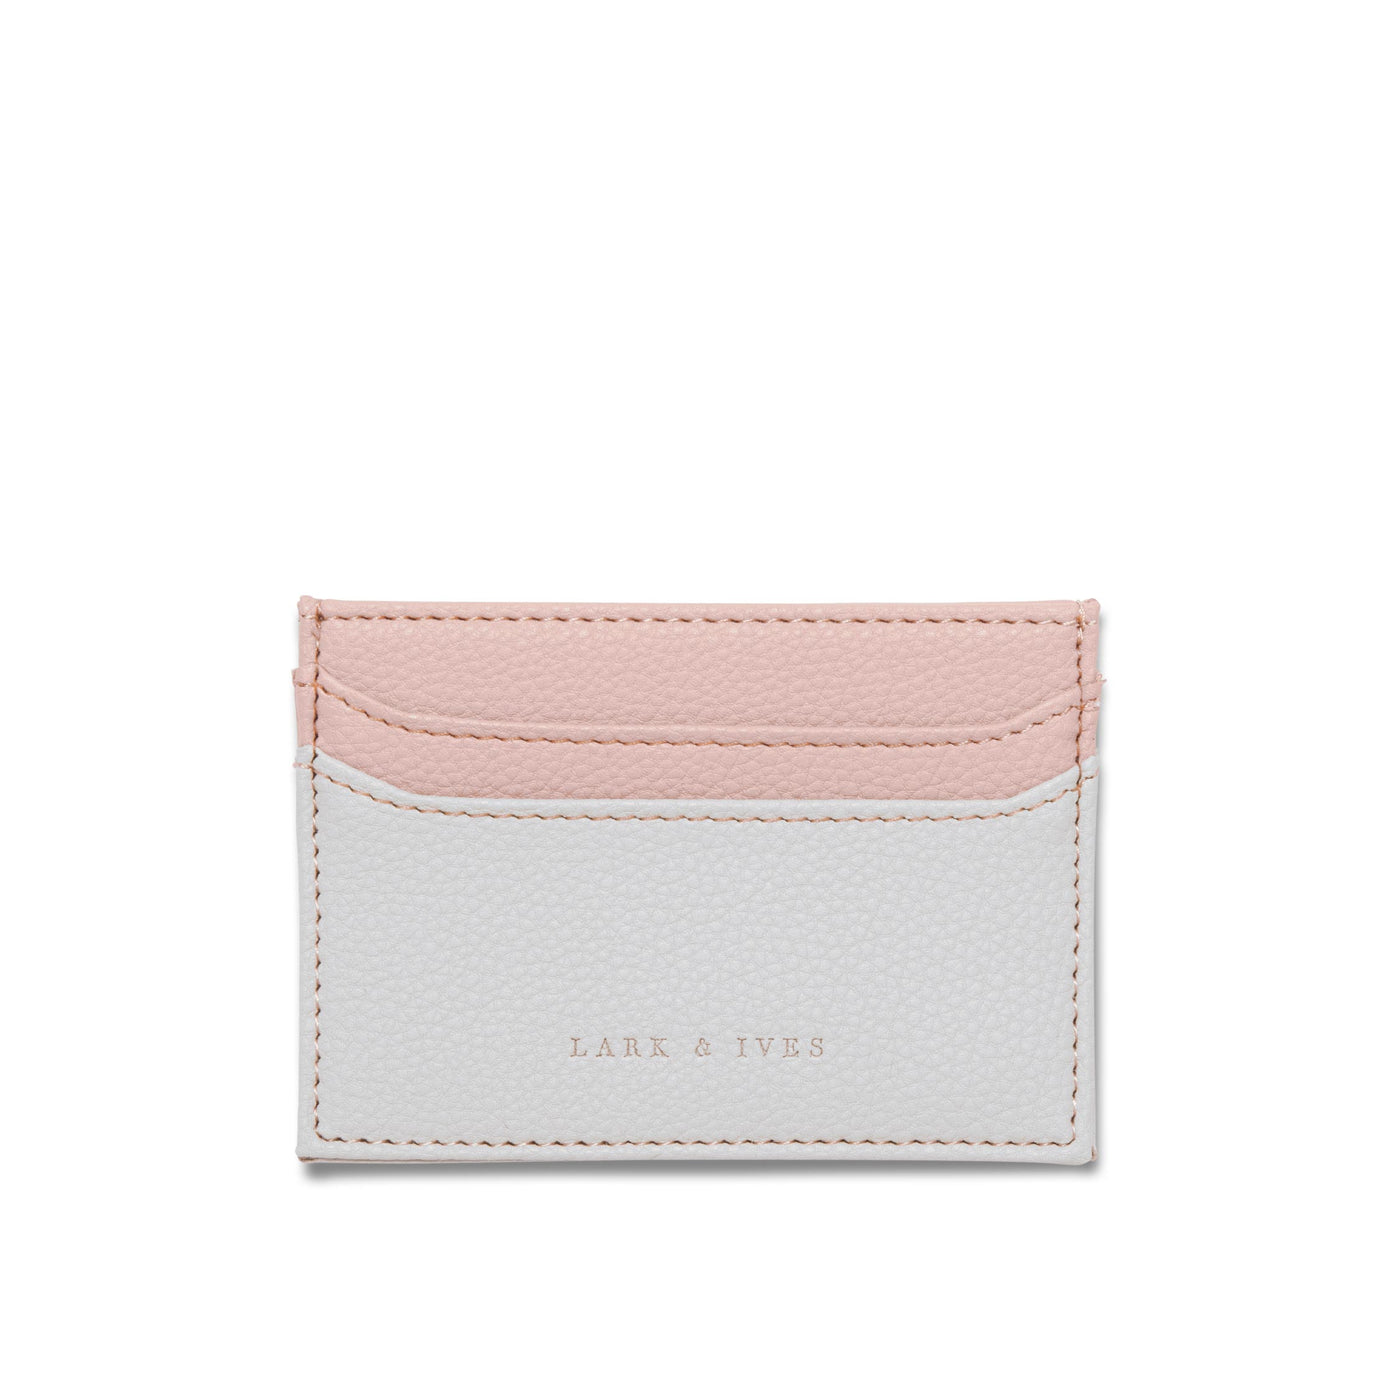 Lark and Ives / Vegan Leather Accessories / Small Accessories / Wallet / Mini Wallet / Card Case / Card Holder / Flat Card Case / Light Grey and Nude Pink